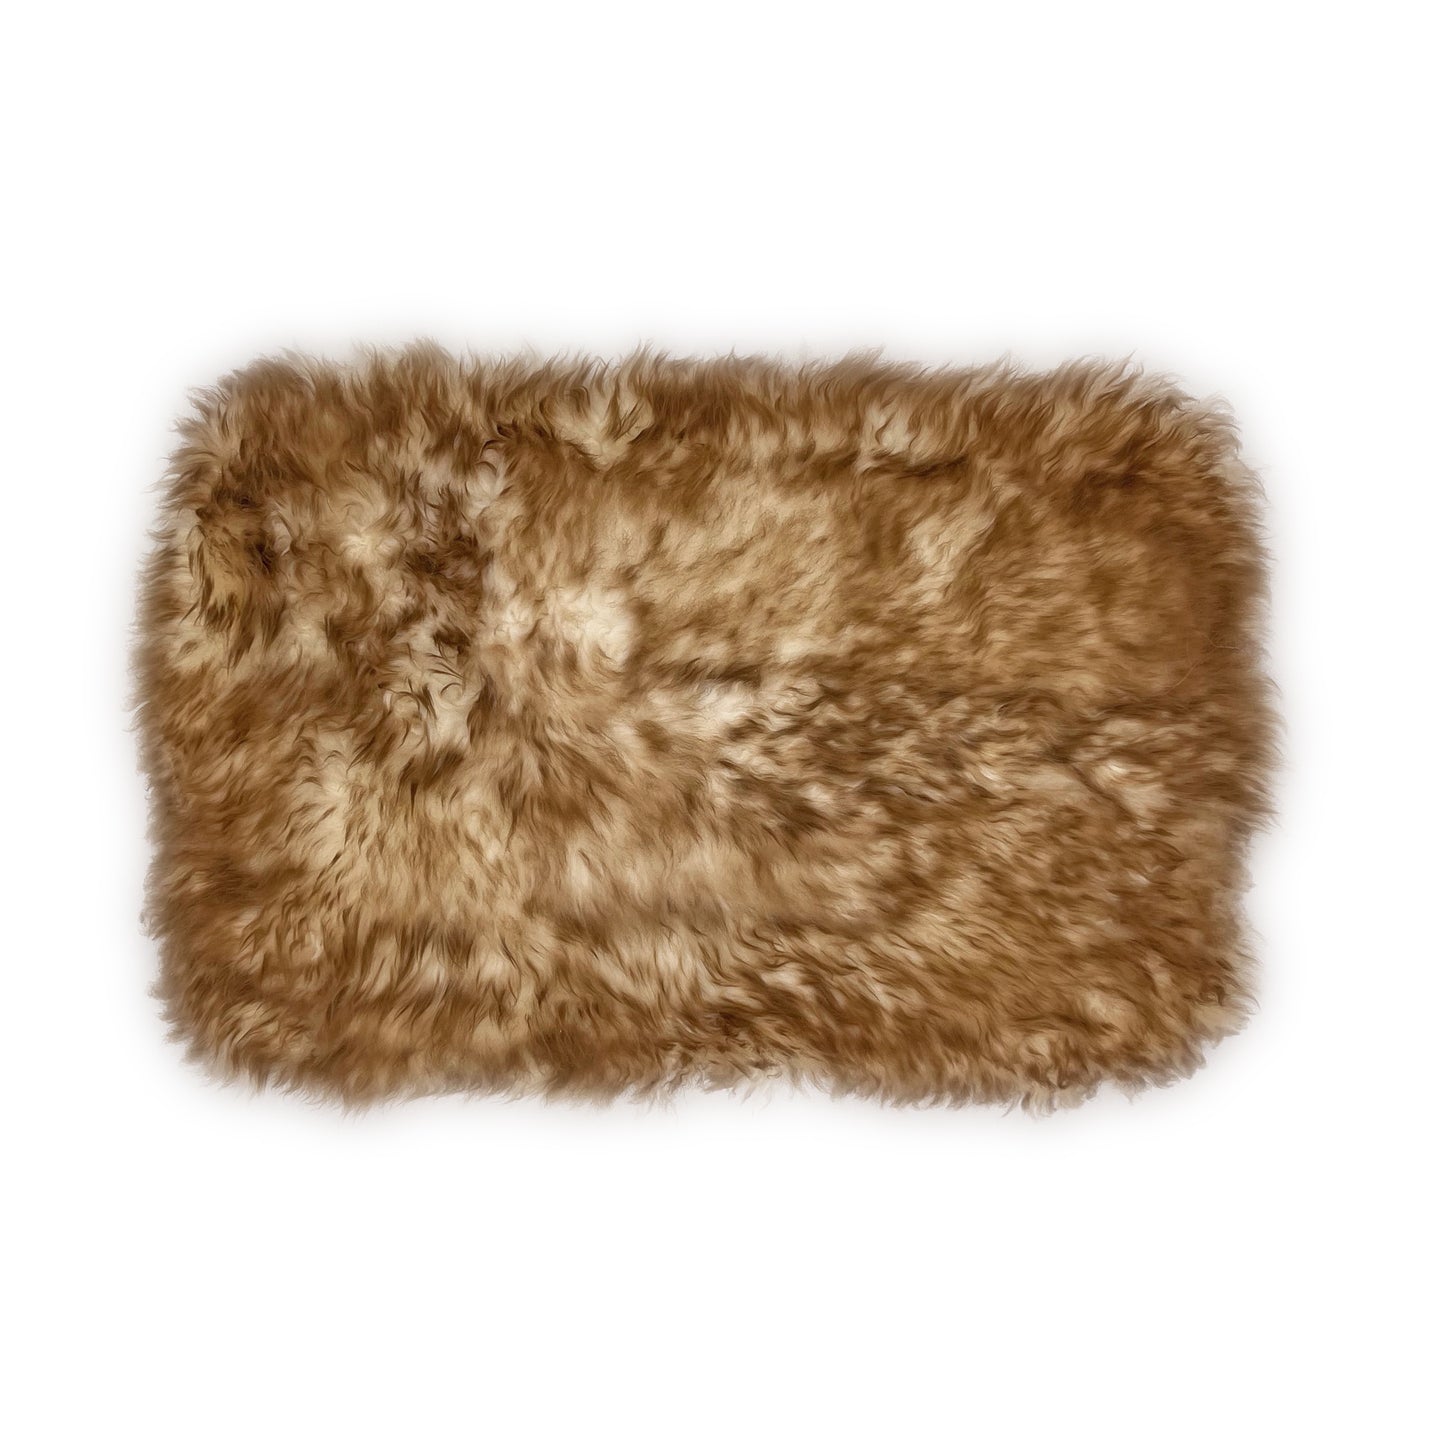 Bowron PetCare Sheepskin Pet Bed, Eclipse (Brown/Ivory), 14x22 in.